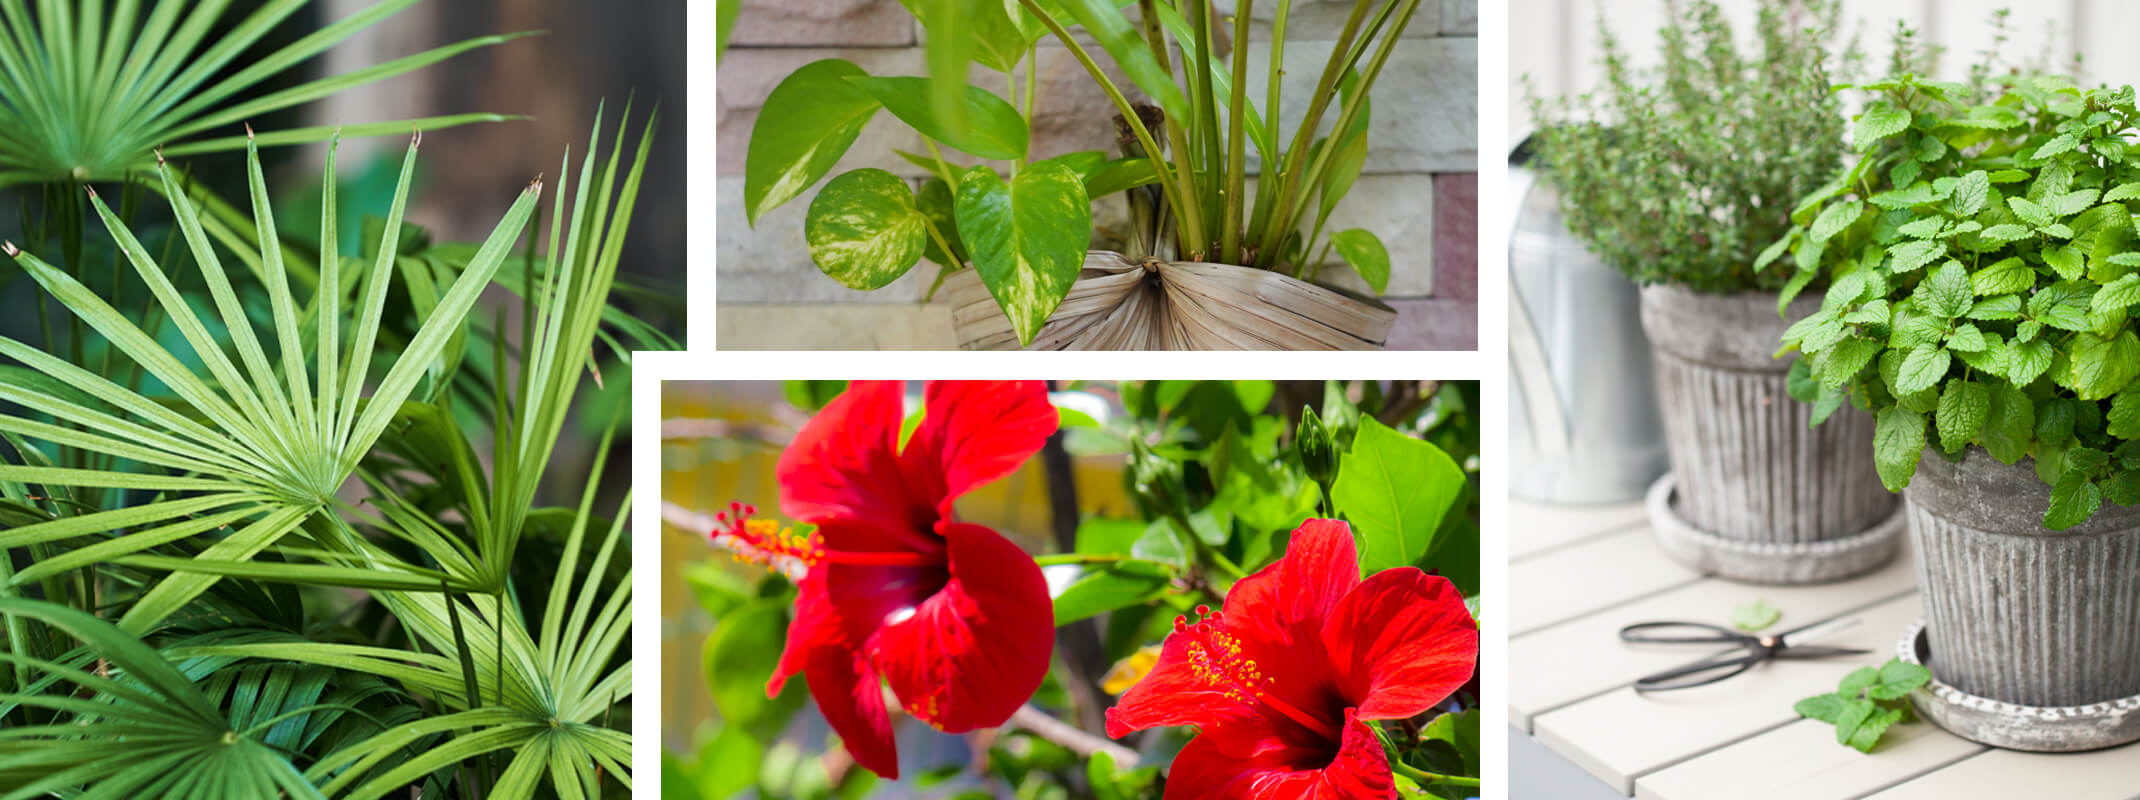 blending or blurring the lines between garden and home with houseplants, herbs and shrubs